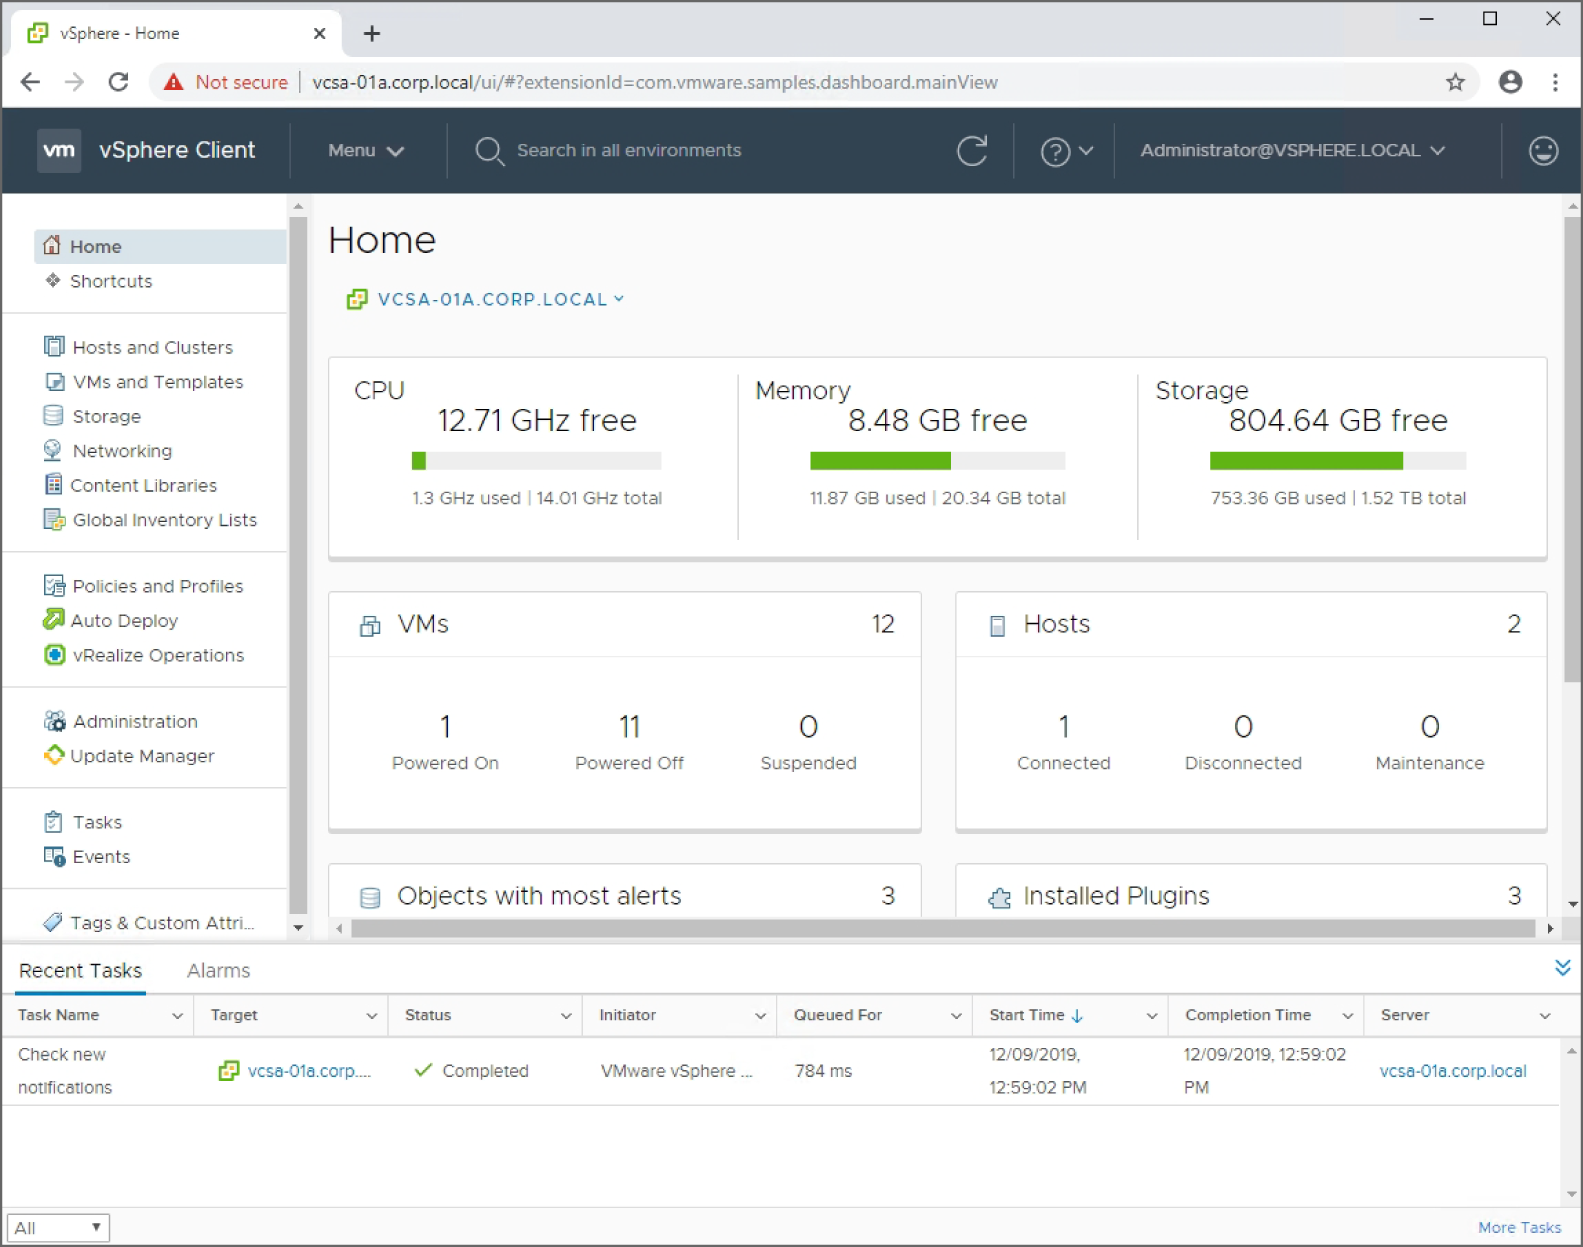 Snapshot of the home page of the HTML5 vSphere client.